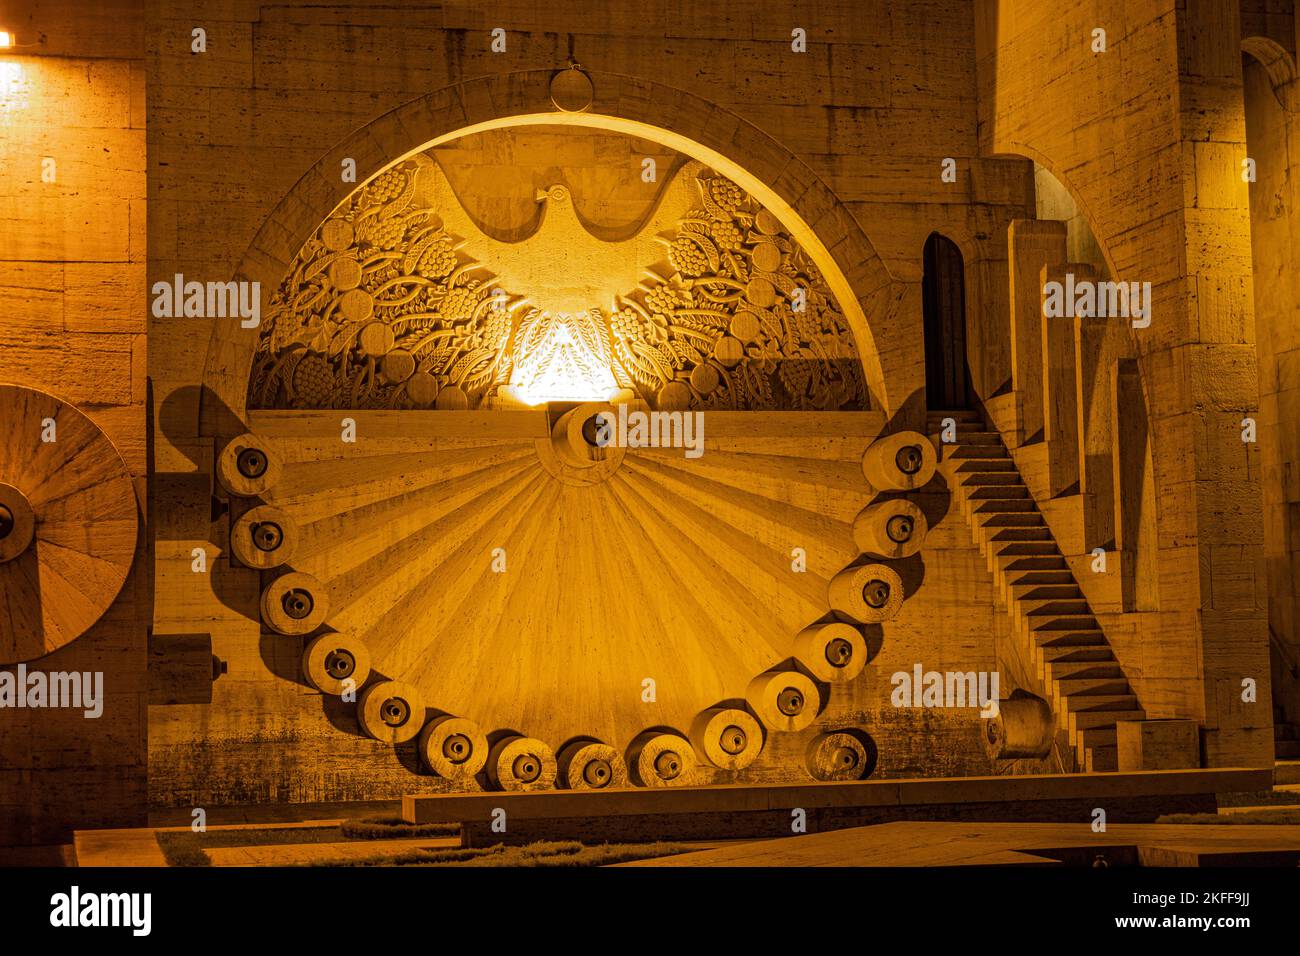 Yerevan, Armenia - October 27, 2022: Illuminated sculpture of a bird with wide-spread wings, in the middle of Cascade, in the evening Stock Photo